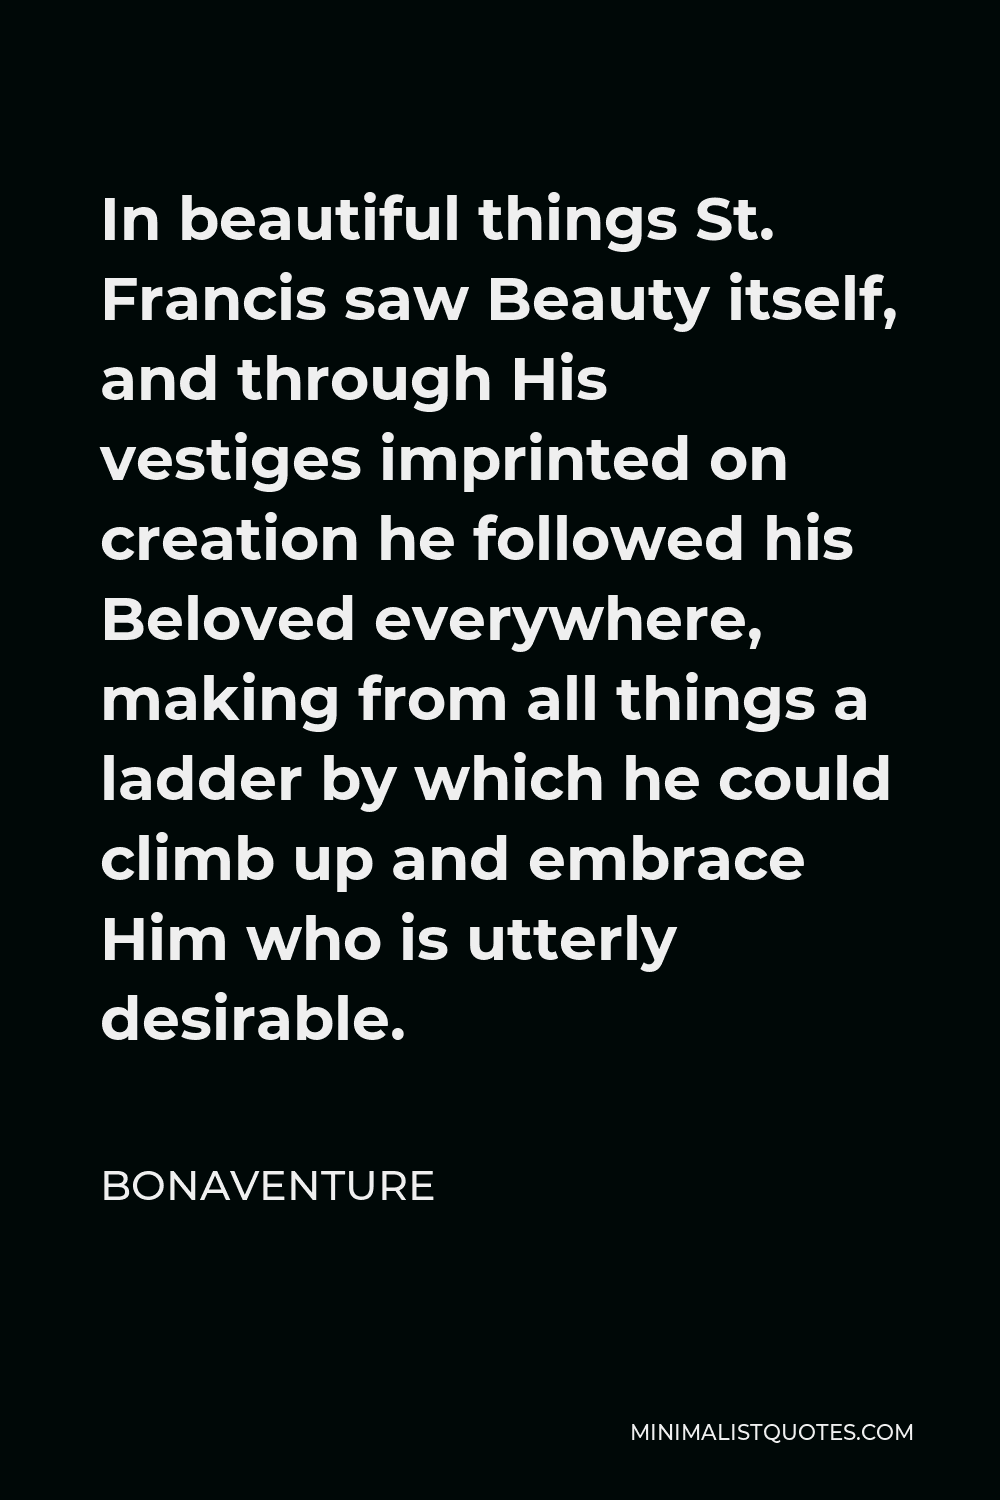 Bonaventure Quote - In beautiful things St. Francis saw Beauty itself, and through His vestiges imprinted on creation he followed his Beloved everywhere, making from all things a ladder by which he could climb up and embrace Him who is utterly desirable.